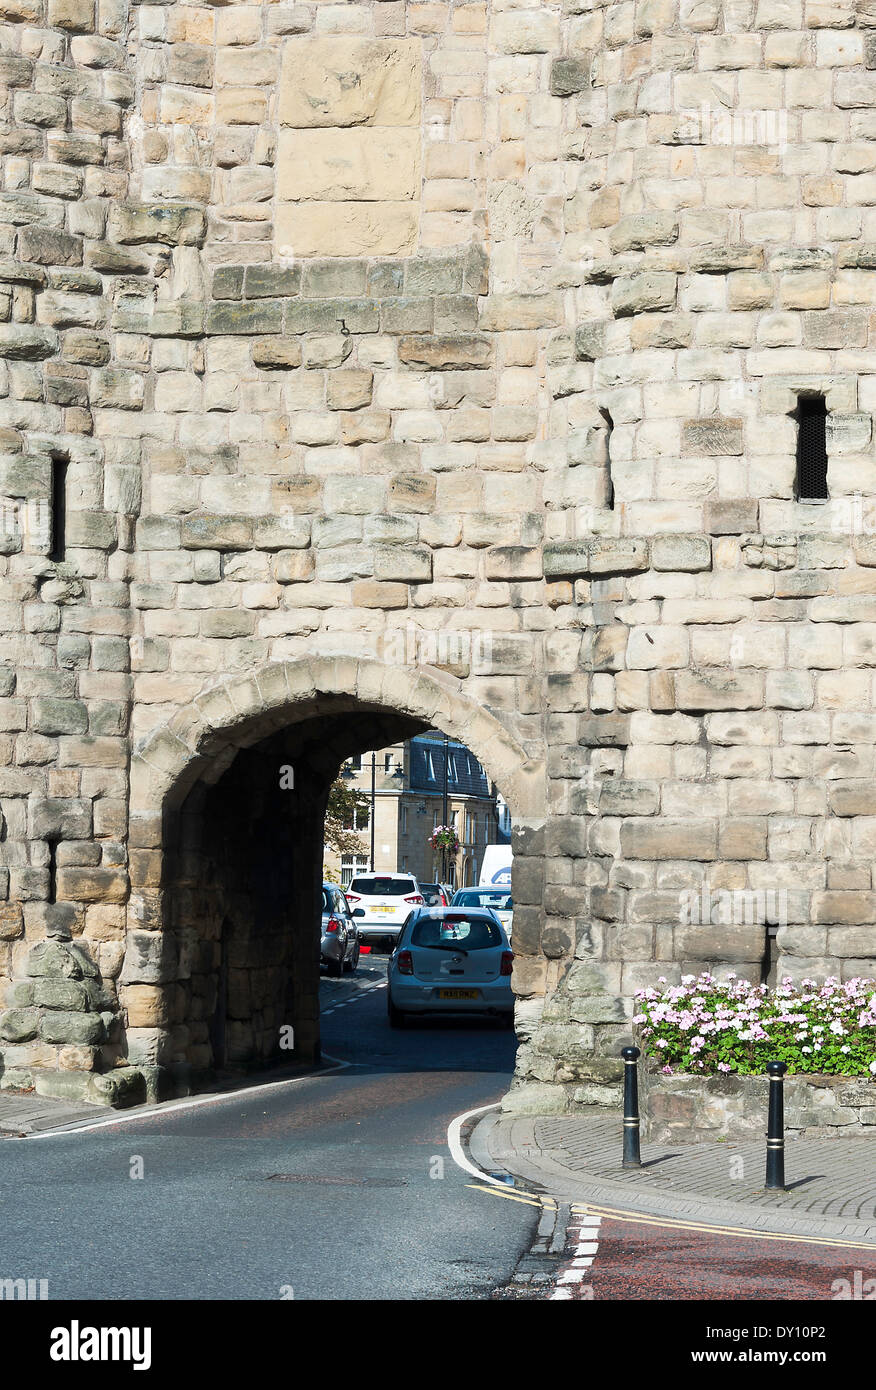 Bondgate Arched Tower Forming Part of the Old Town Walls of Alnwick Northumberland England United Kingdom UK Stock Photo